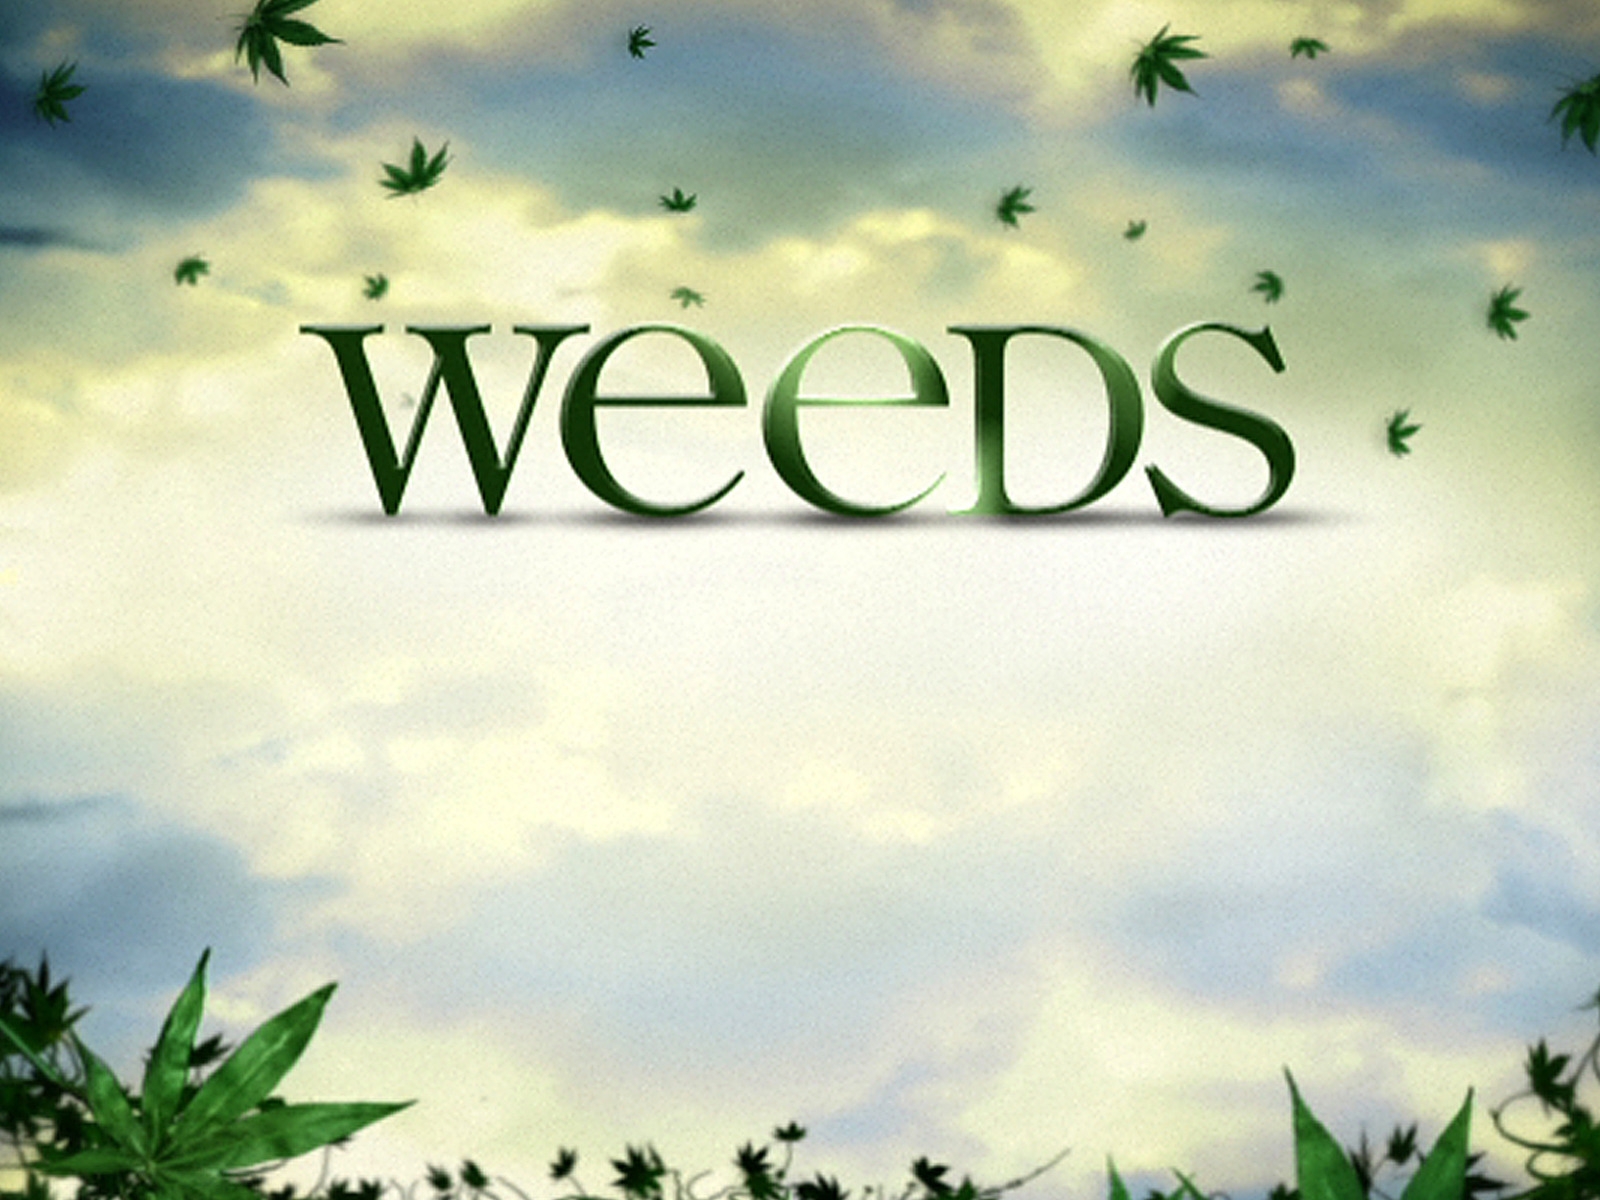 Weeds Logo for 1600 x 1200 resolution